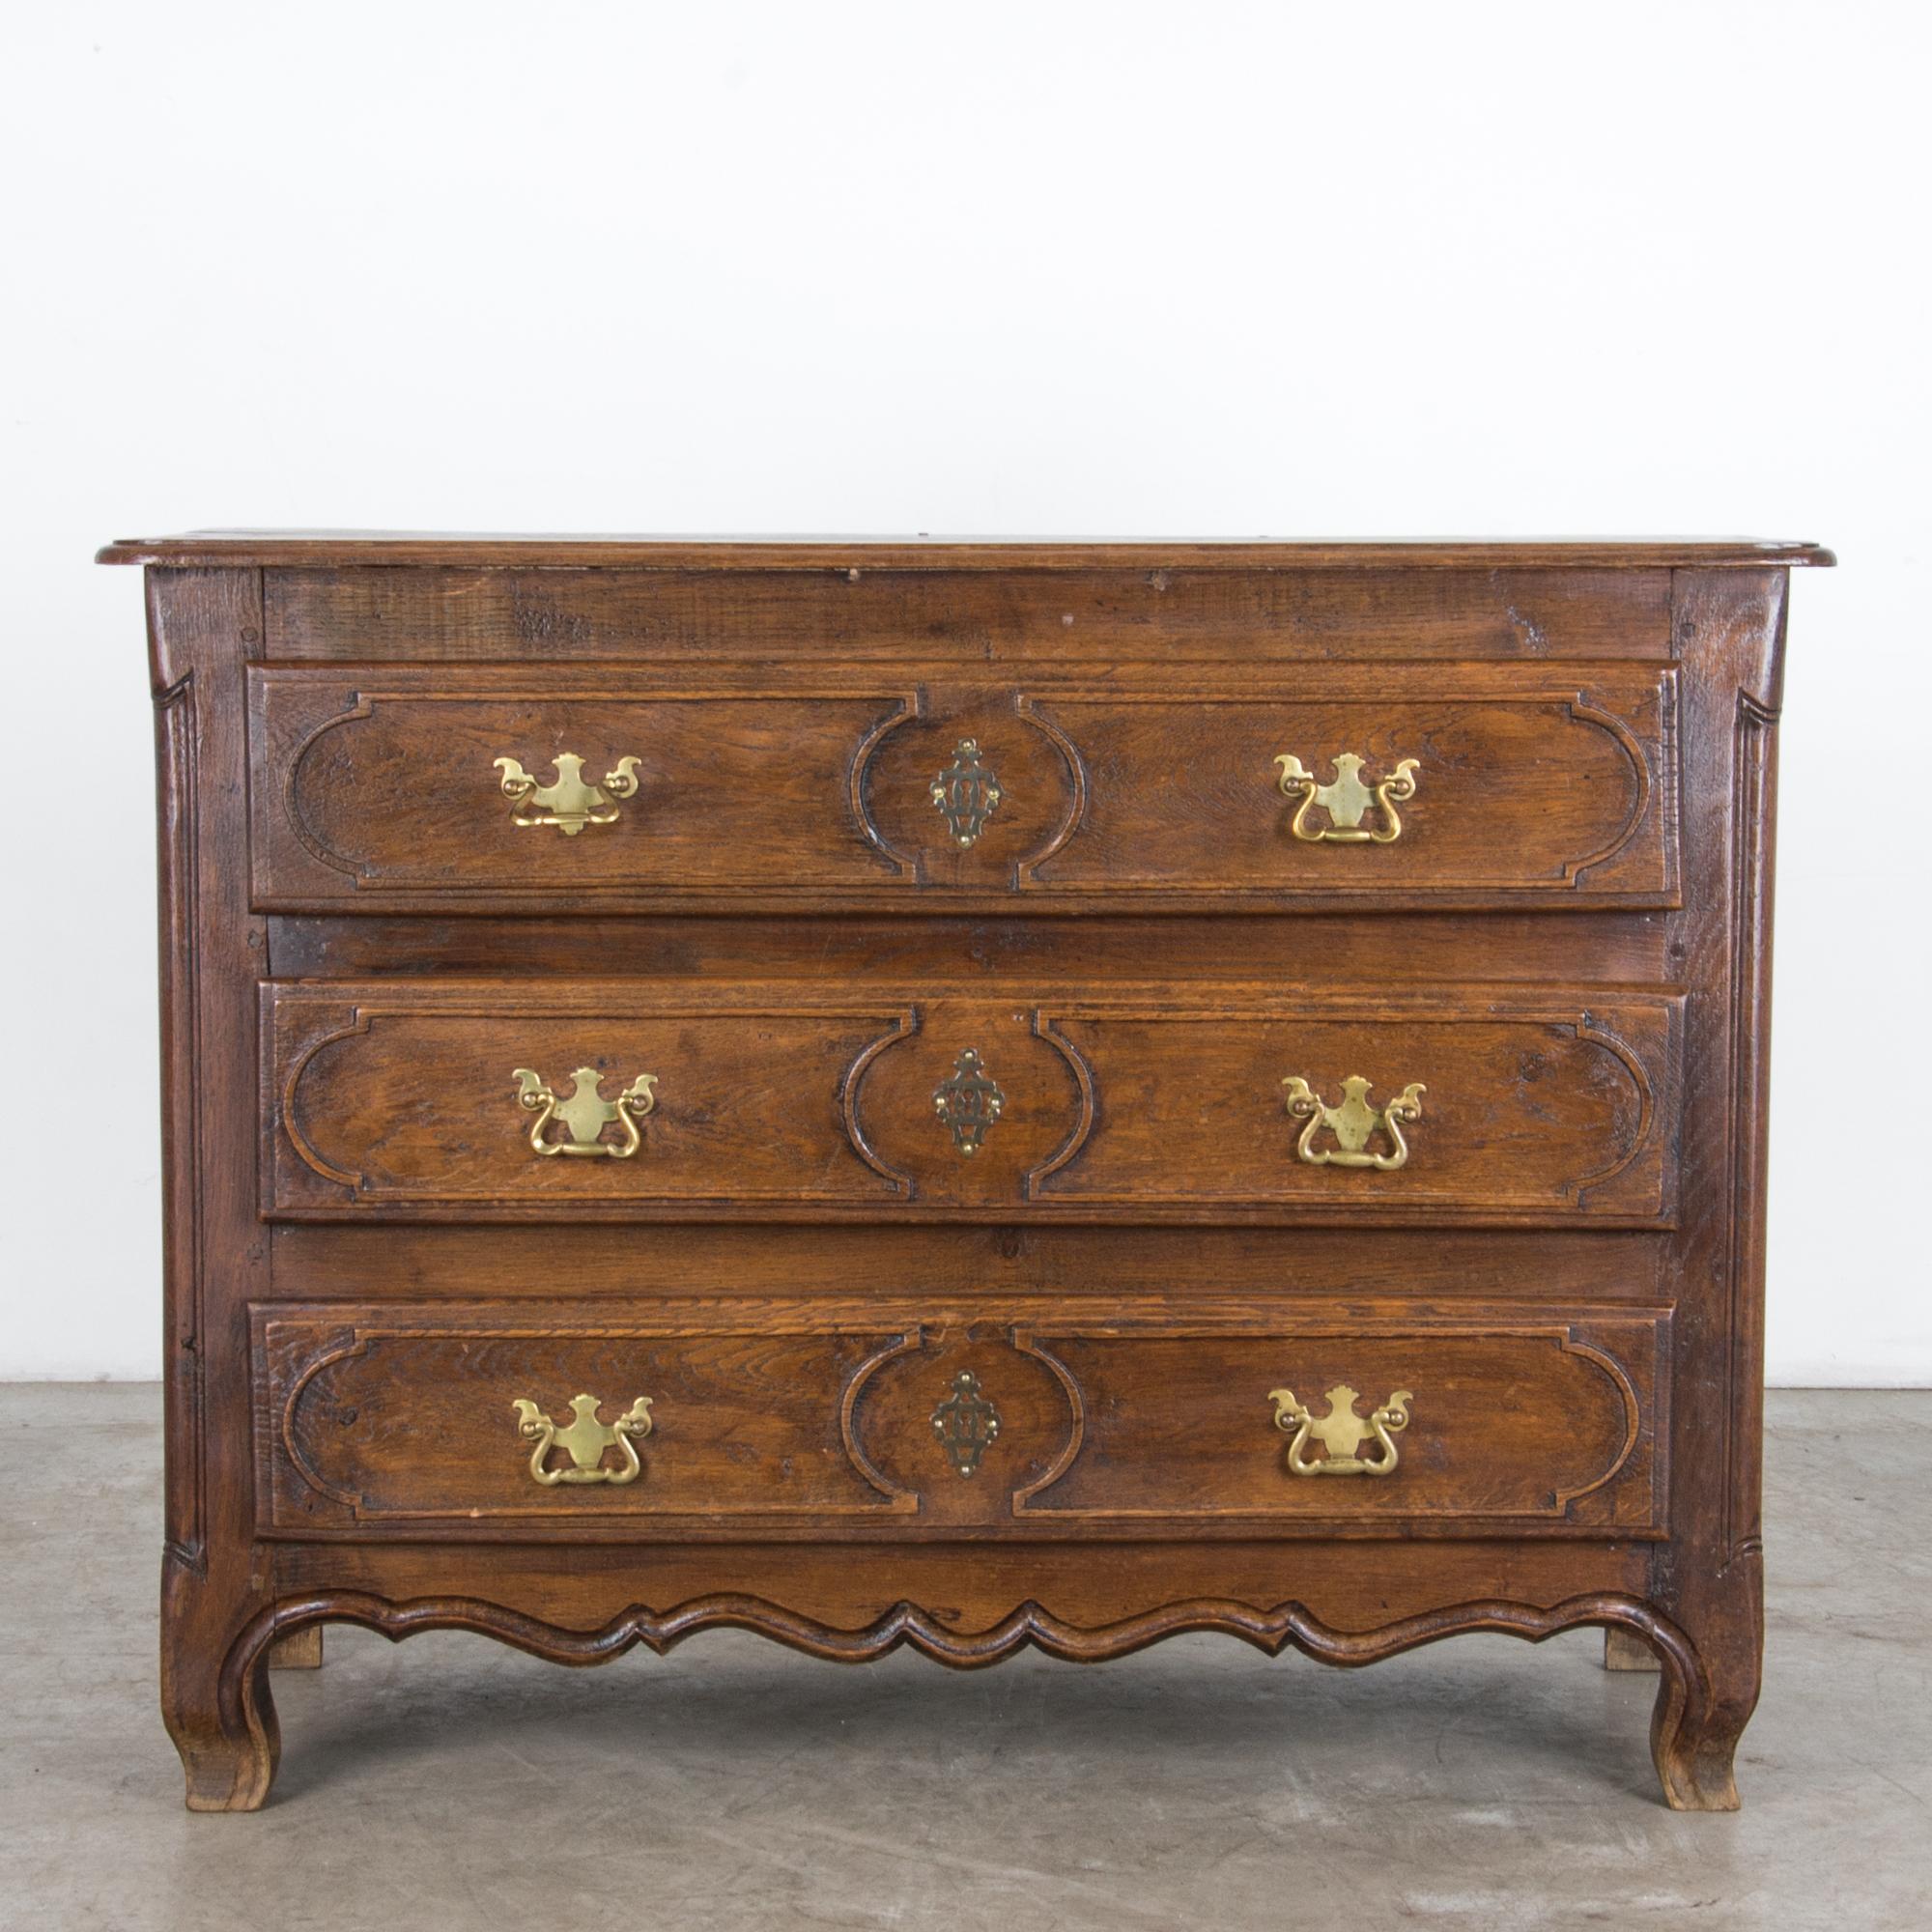 A chest of drawers from France, circa 1910. Brass fittings compliment a moody dark finish, with an inner warmth of textured oak. The elegant original finish suits the subtle carved detailing. A distinct approach typifies the casual yet refined